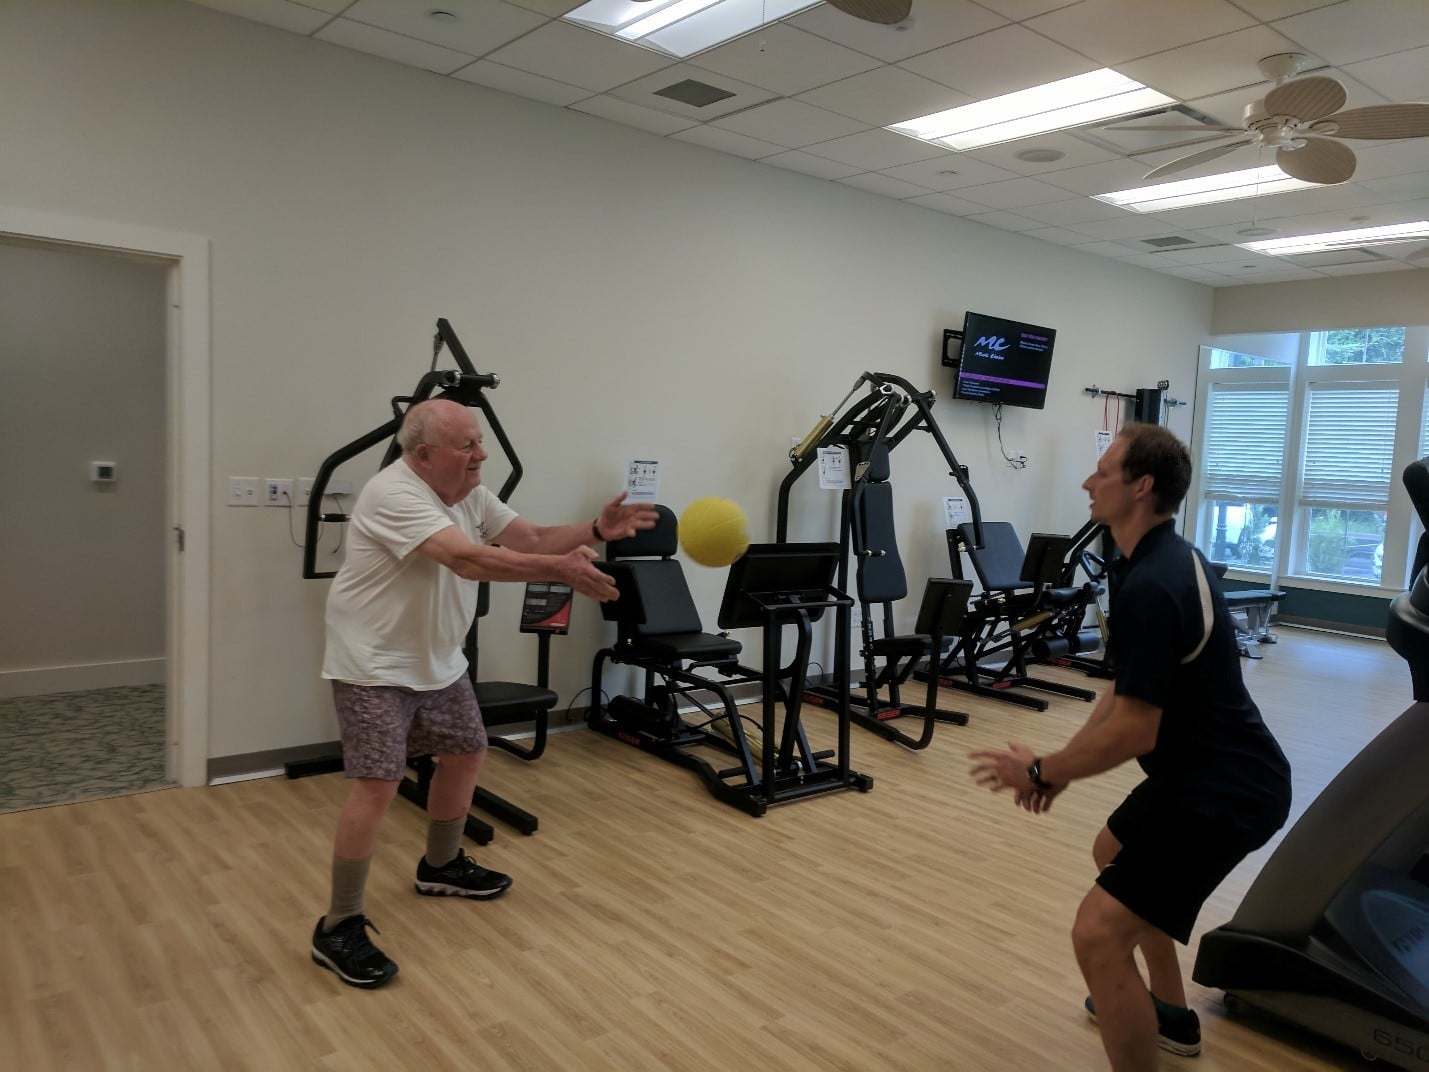 physical rehab 2 men tossing yellow ball for therapy